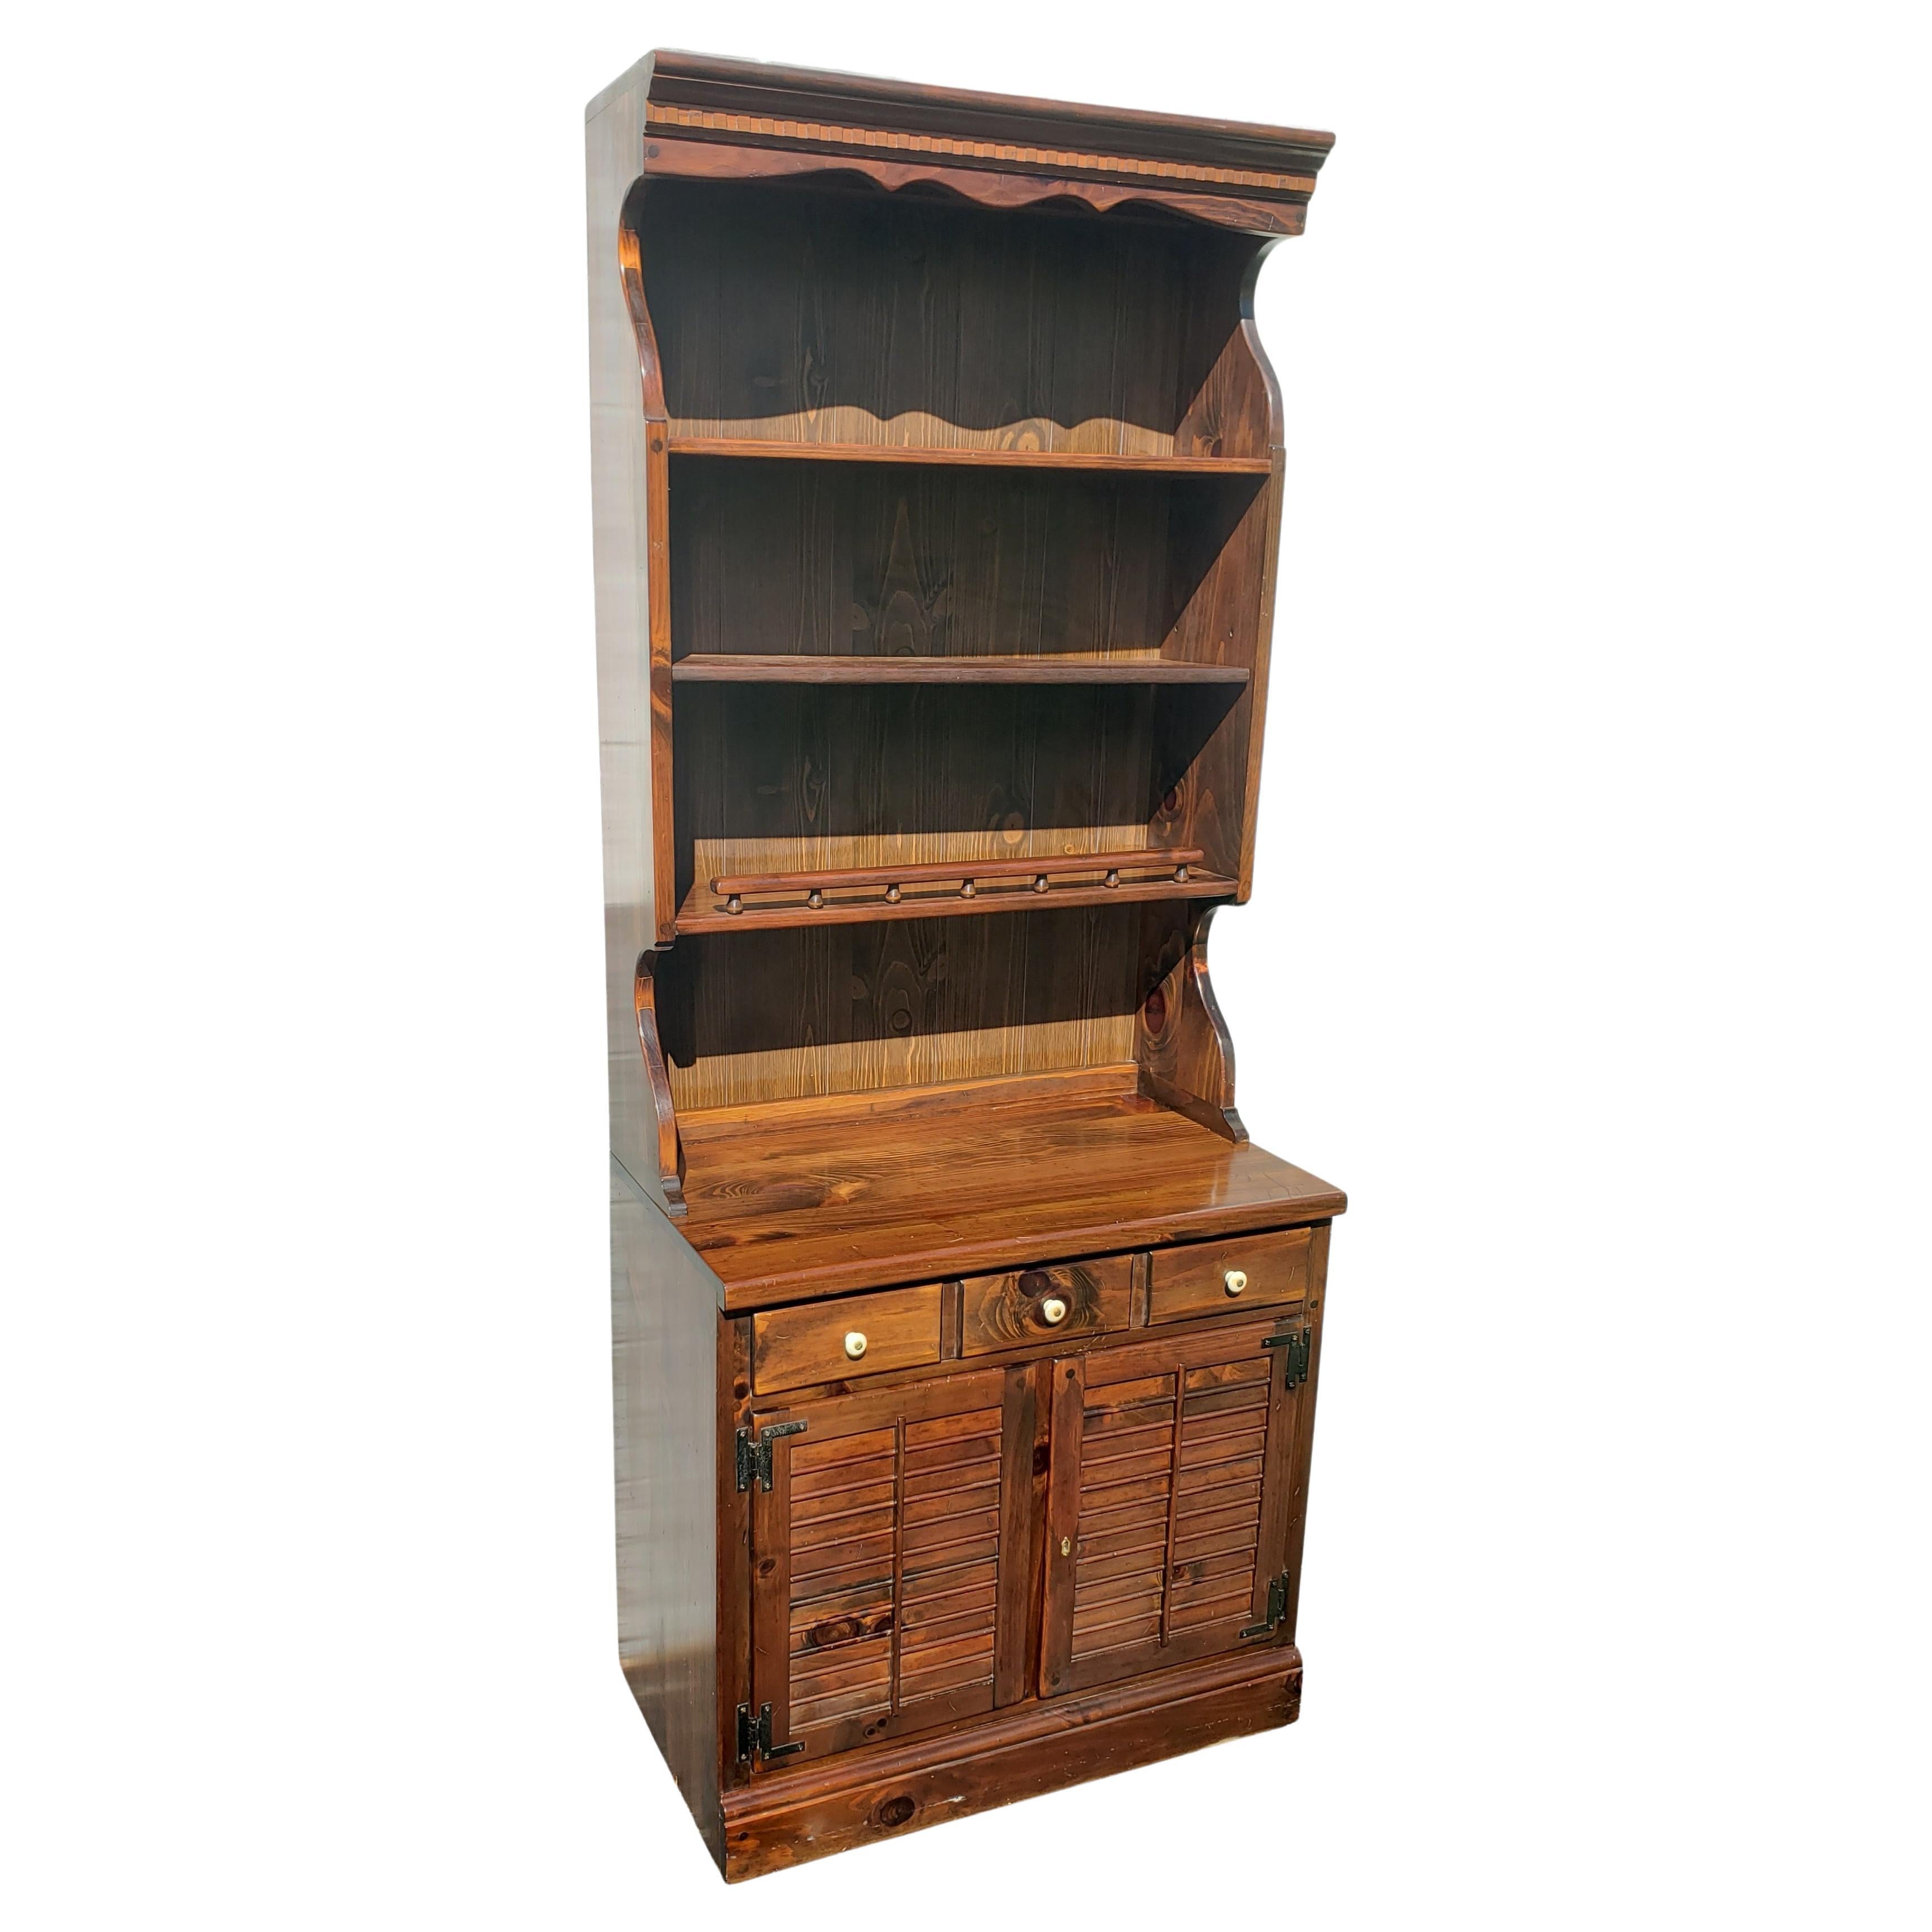 Beautiful Ethan Allen Antiqued Pine Old Tavern cabinet with hutch. Hutch just seat on the base cabinet and can be use as a separate piece of furniture for displaying or as a bookcase. The base cabinet is compartmented to store liquor, wine bottles